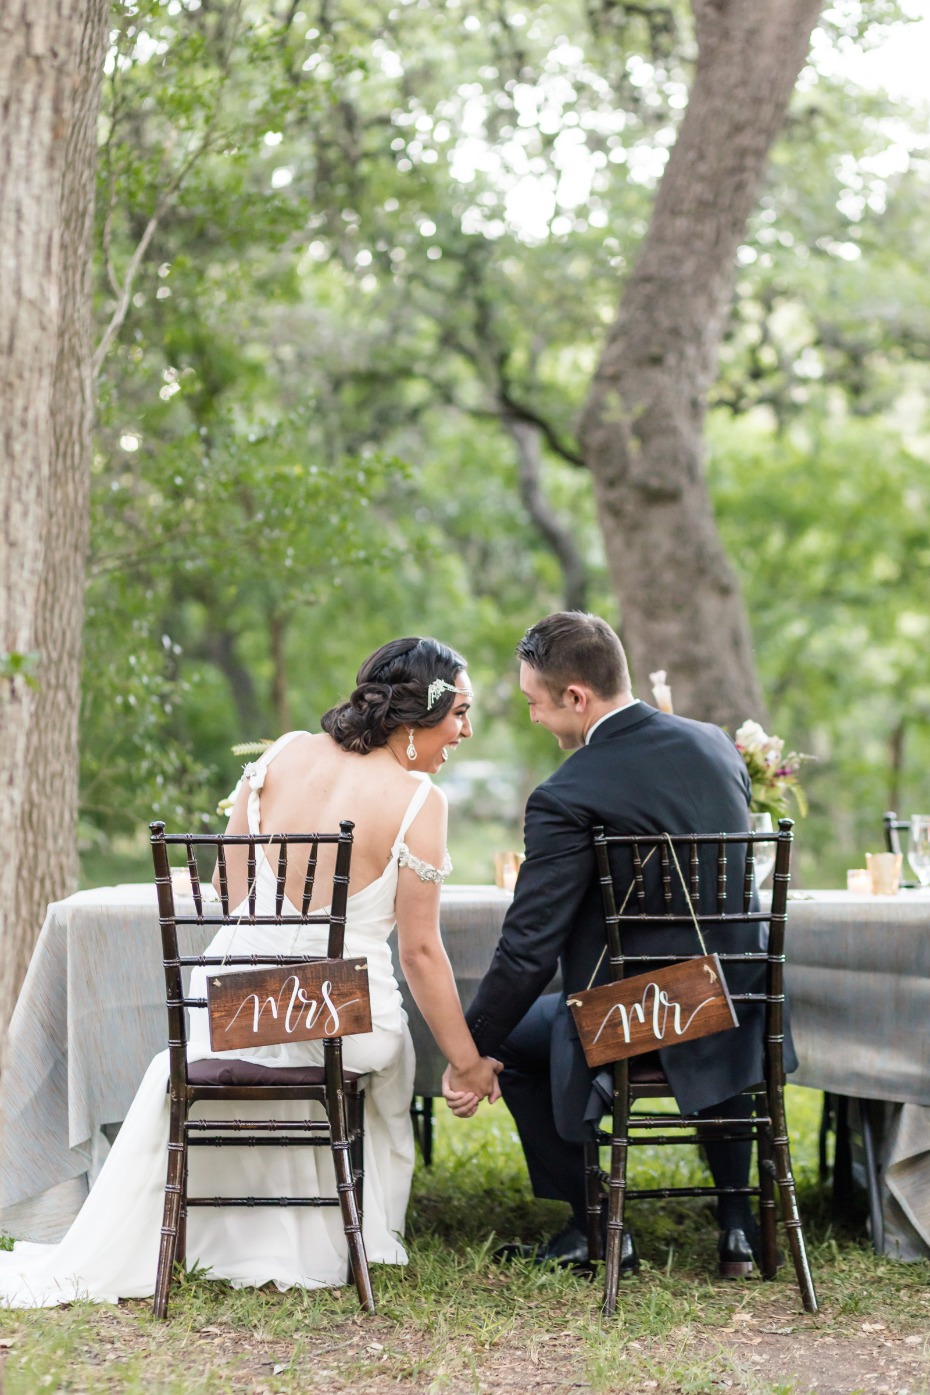 mr and mrs wedding table seat signs